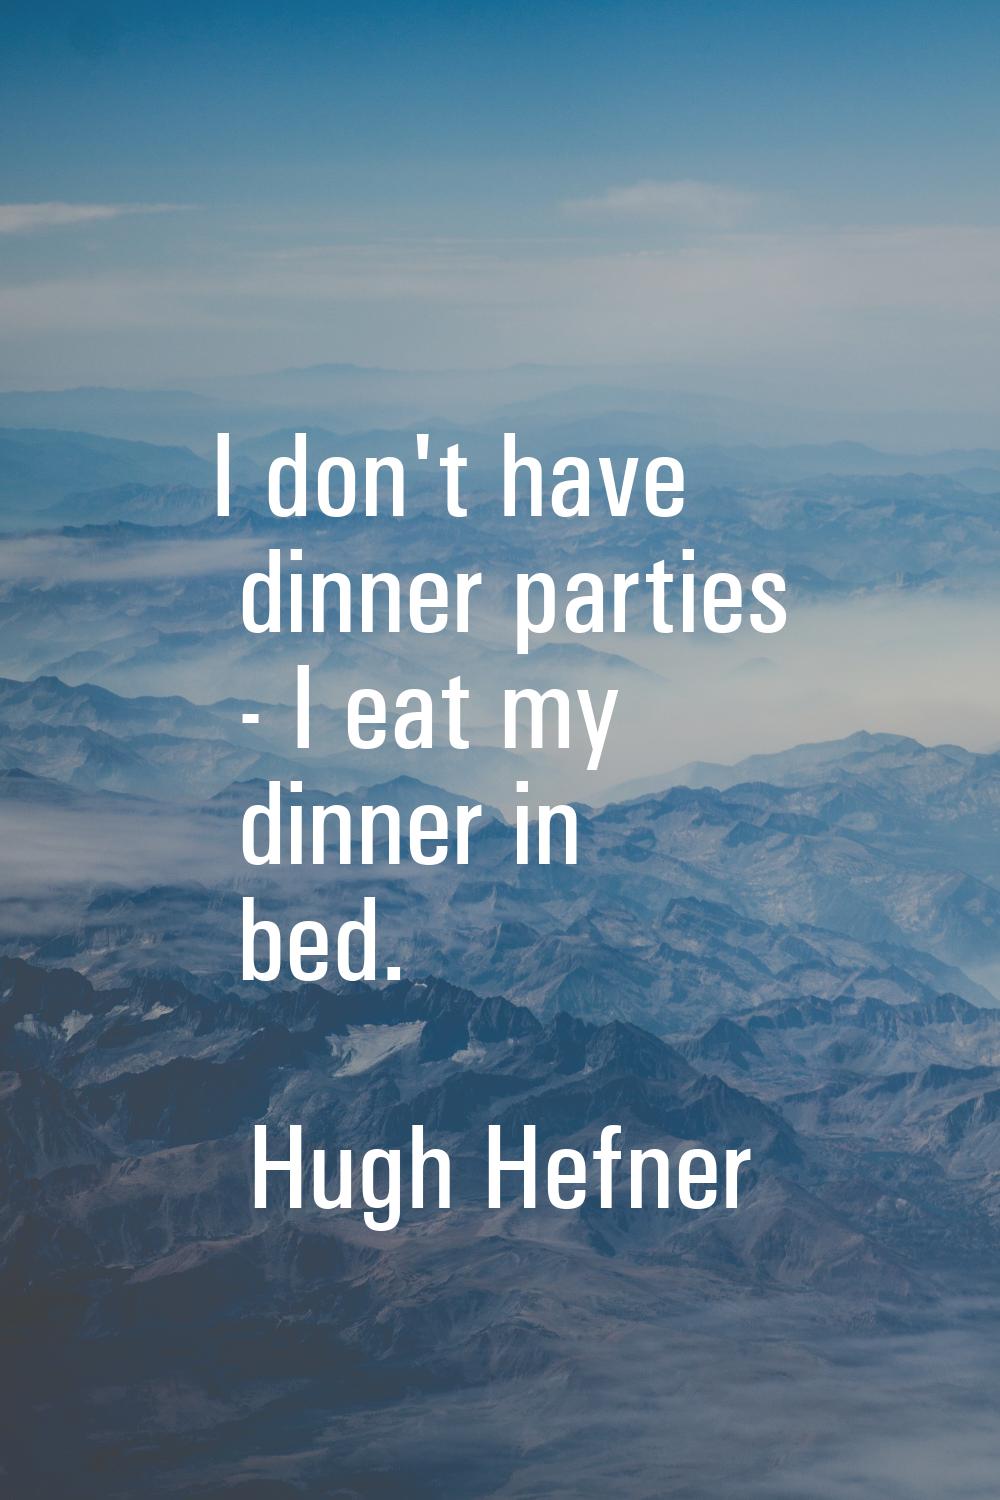 I don't have dinner parties - I eat my dinner in bed.